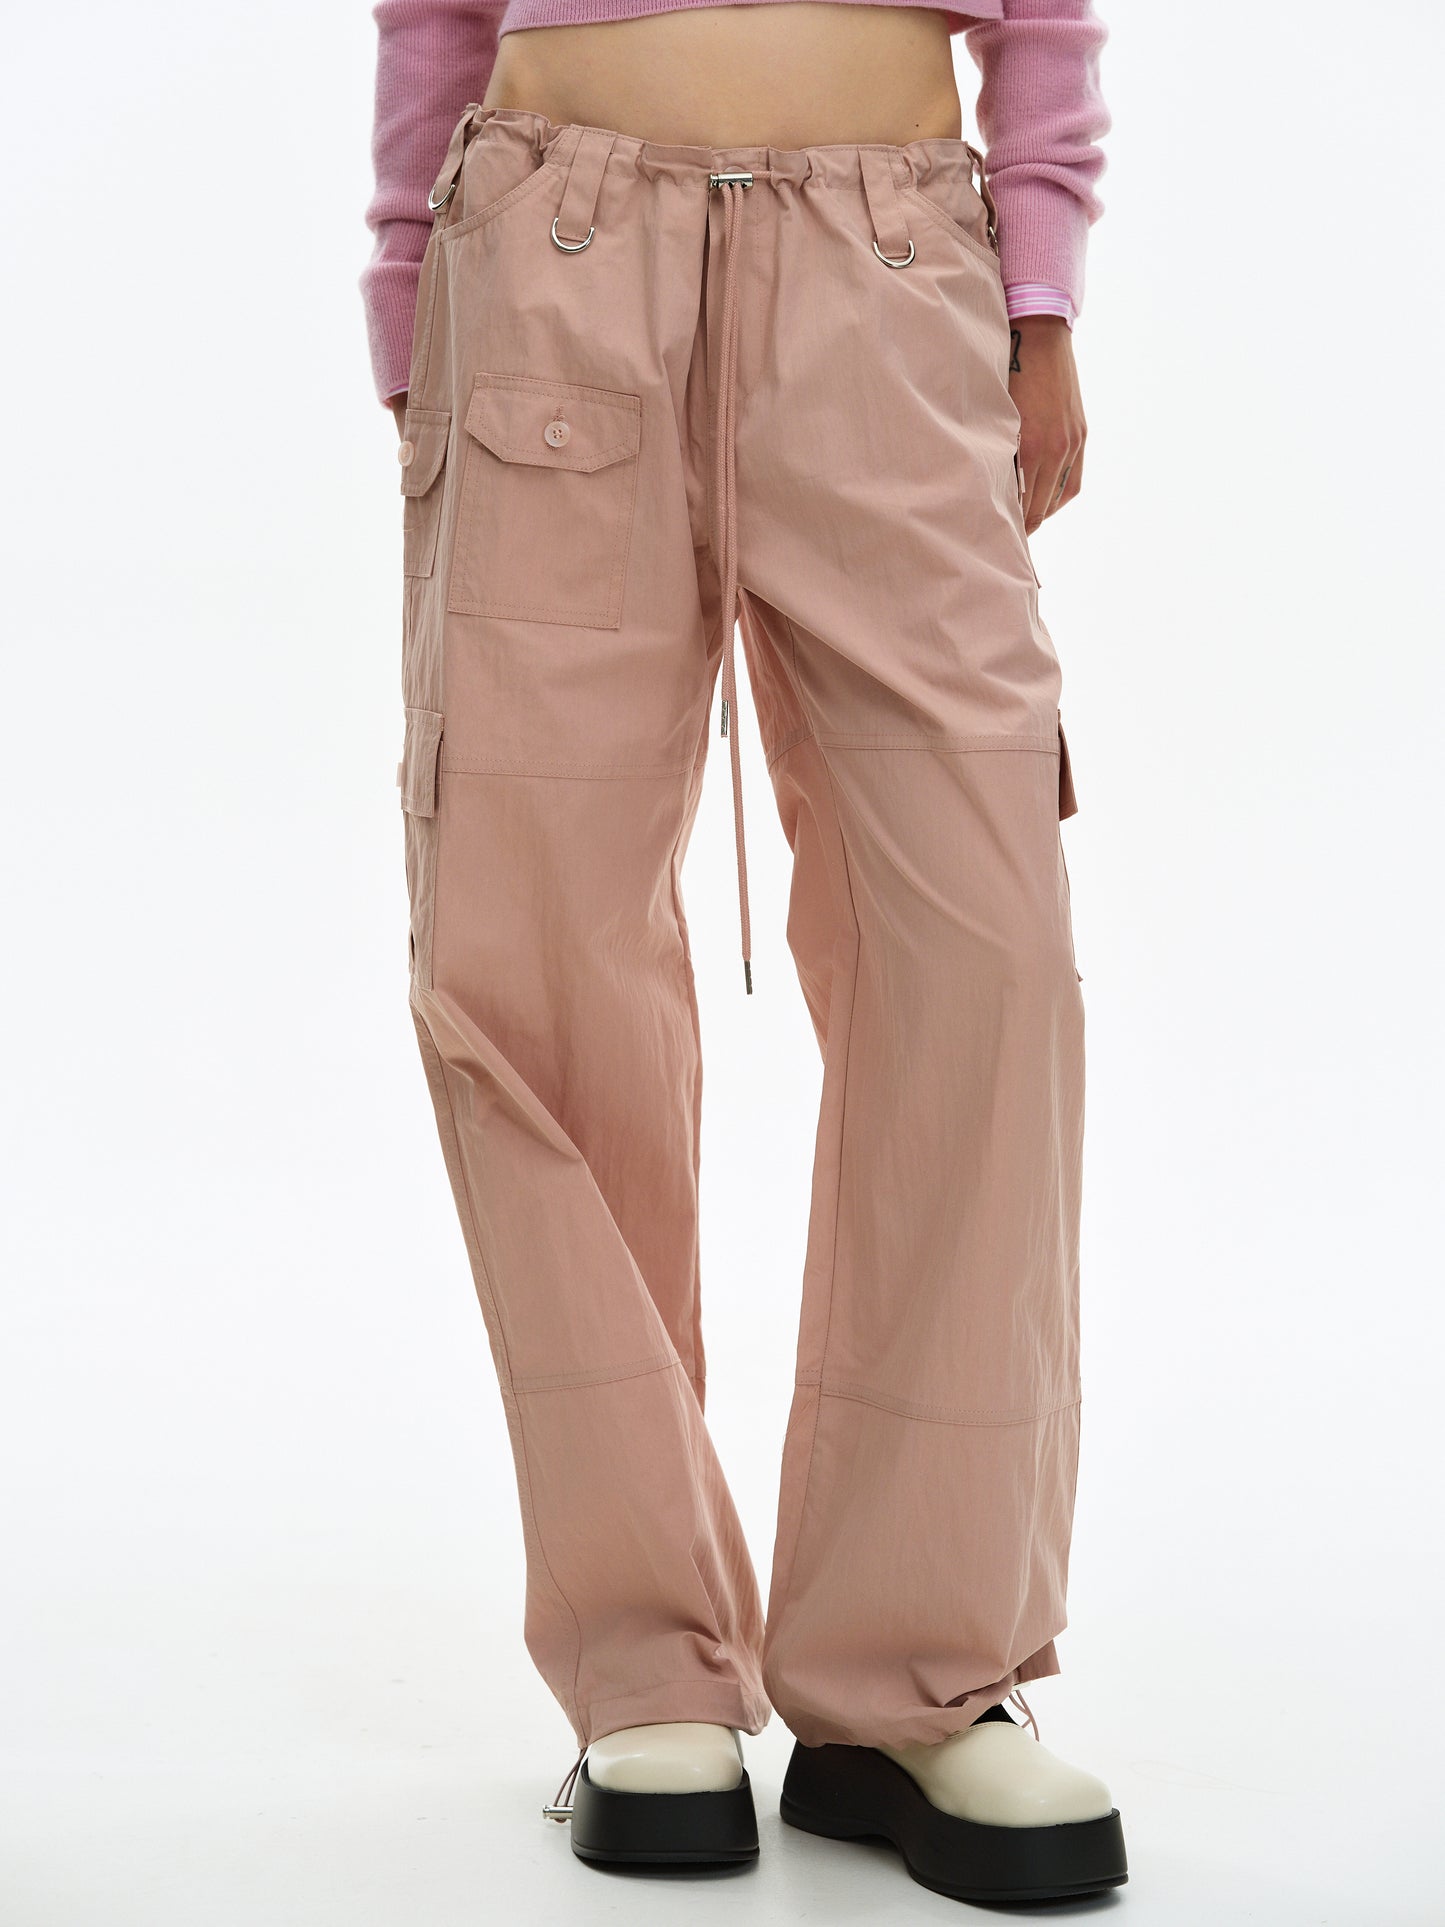 Trousers, SourceUnknown Cargo Parachute Dusty – Pink